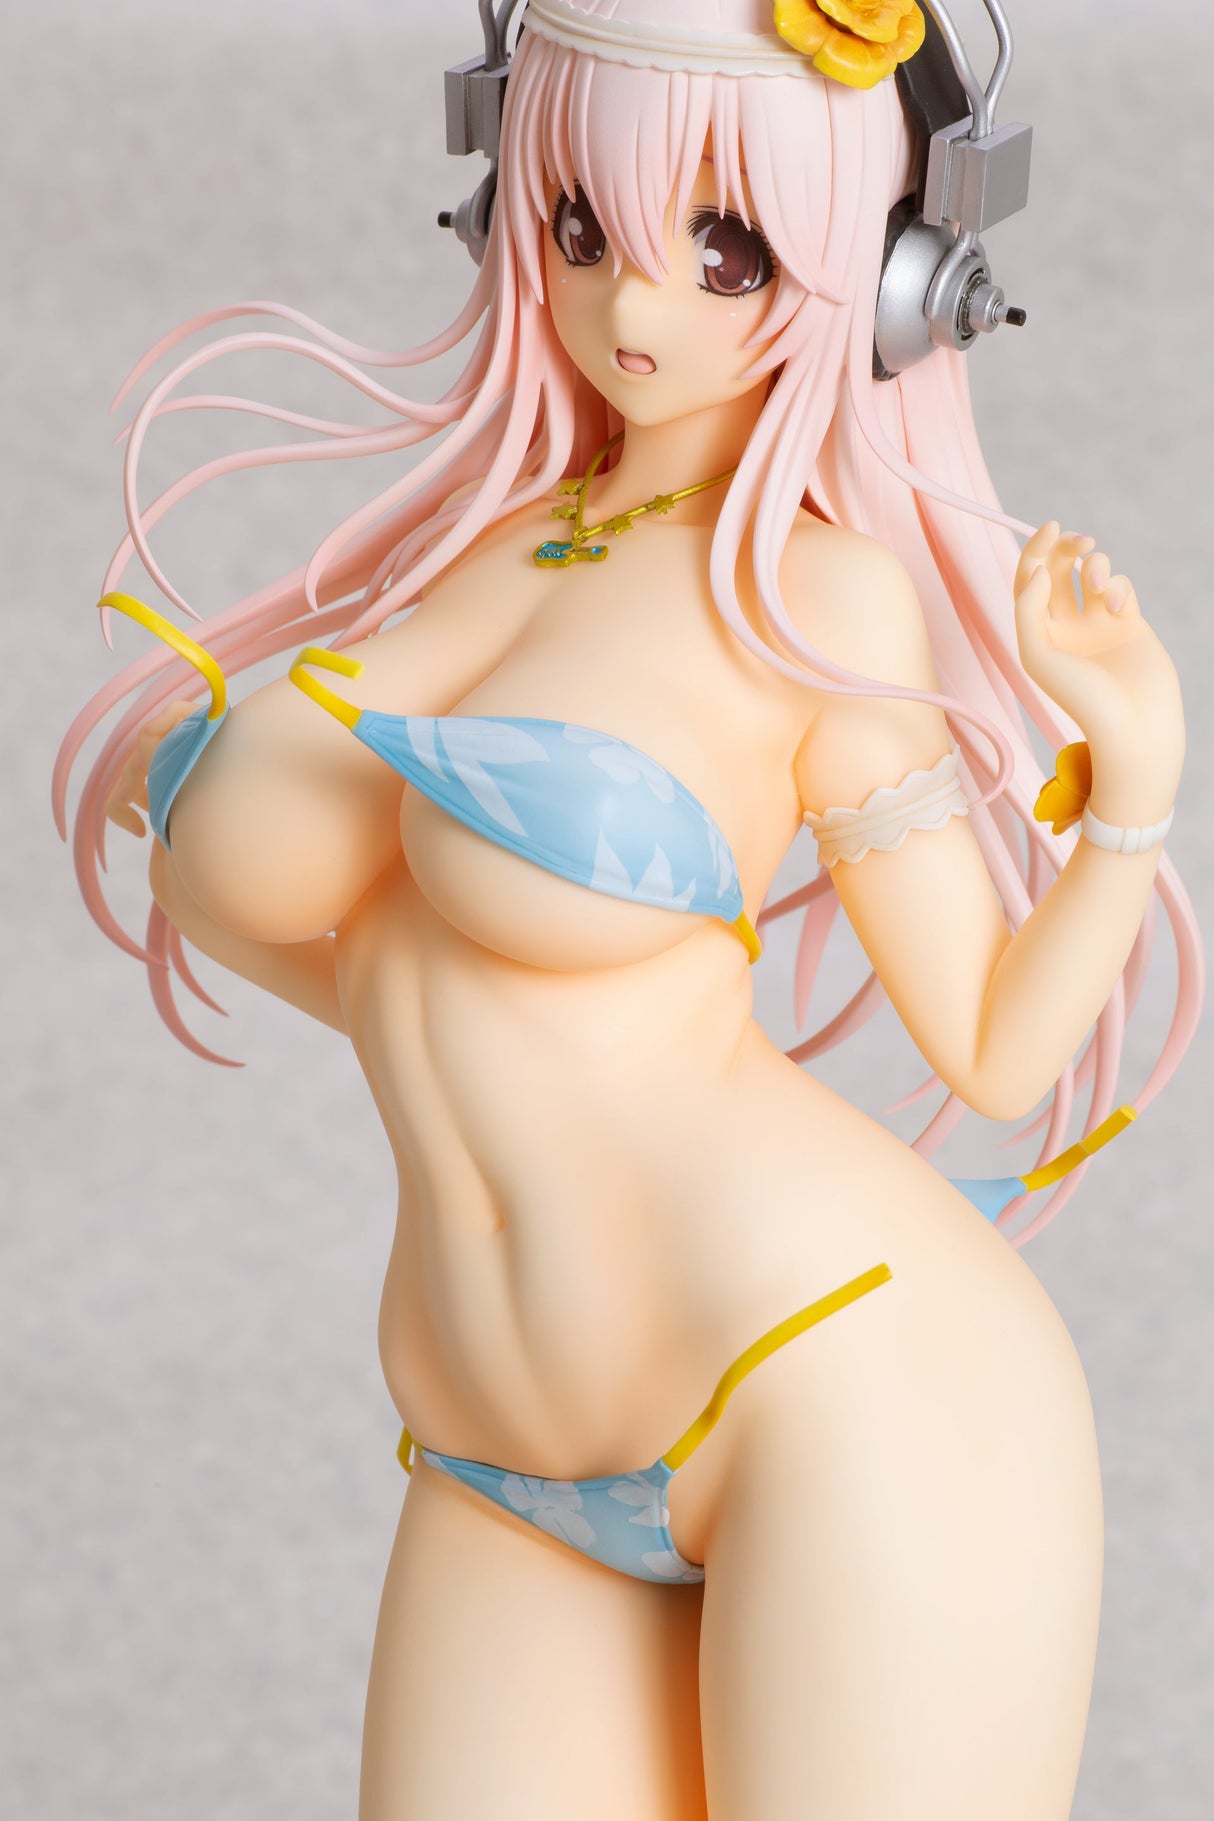 SoniComi (Super Sonico) - Sonico - 1/4.5 - Summer Vacation ver. (Orchid Seed), Franchise: SoniComi, Brand: Orchid Seed, Release Date: 10. Jan 2020, Type: General, Dimensions: 350.0 mm, Material: PVC, ABS, Nippon Figures